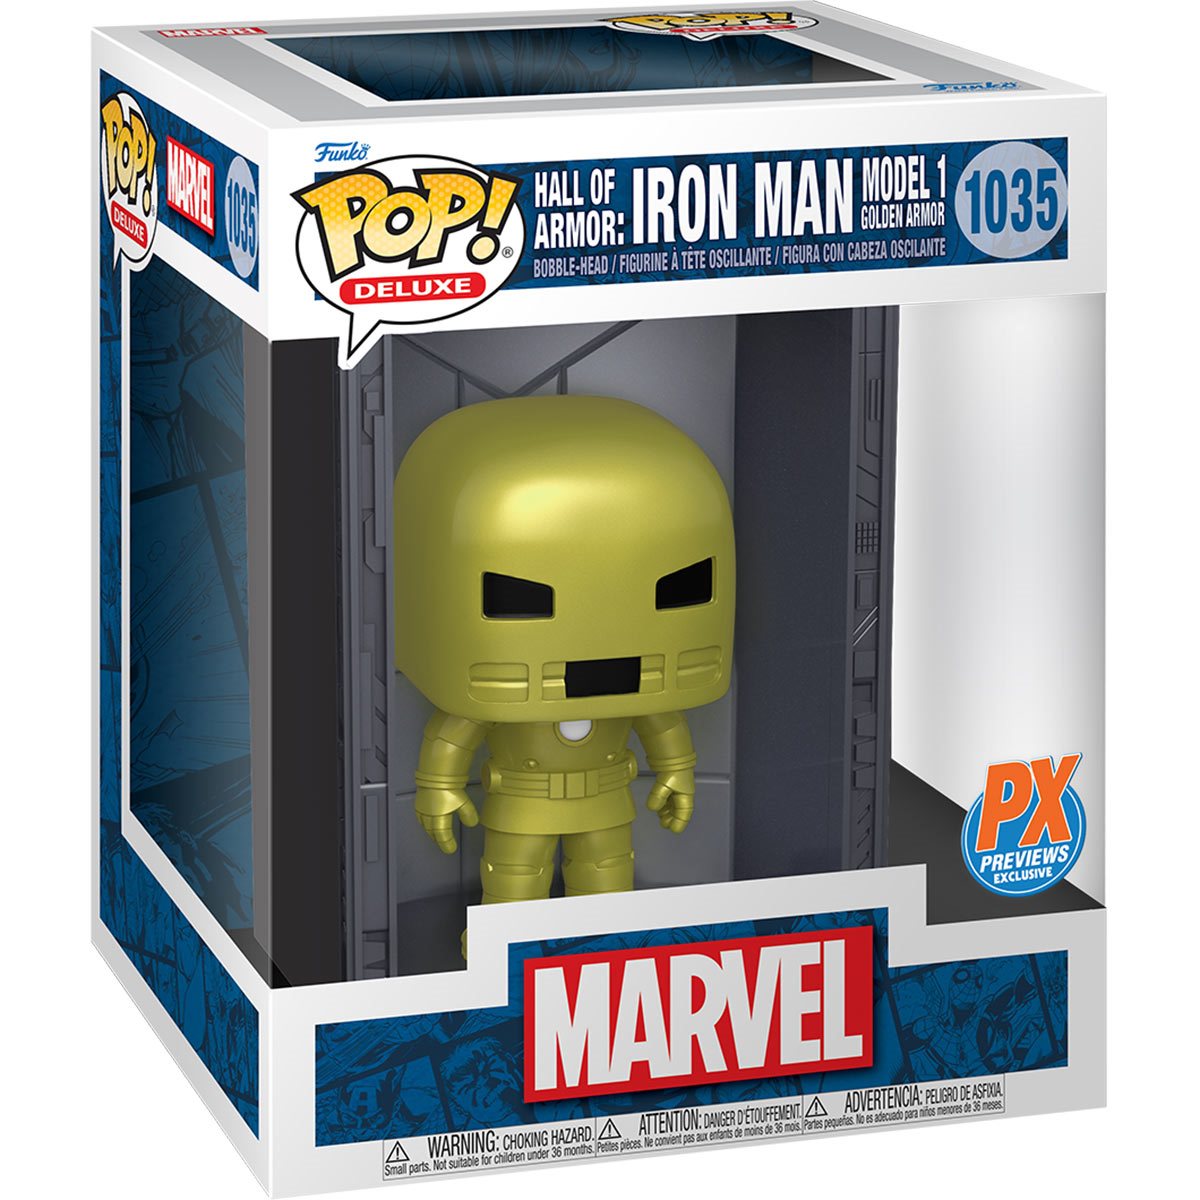 Funko POP! Marvel Iron Man: Hall of Armor - Iron Man Mark 1 Deluxe (Previews Exclusive)